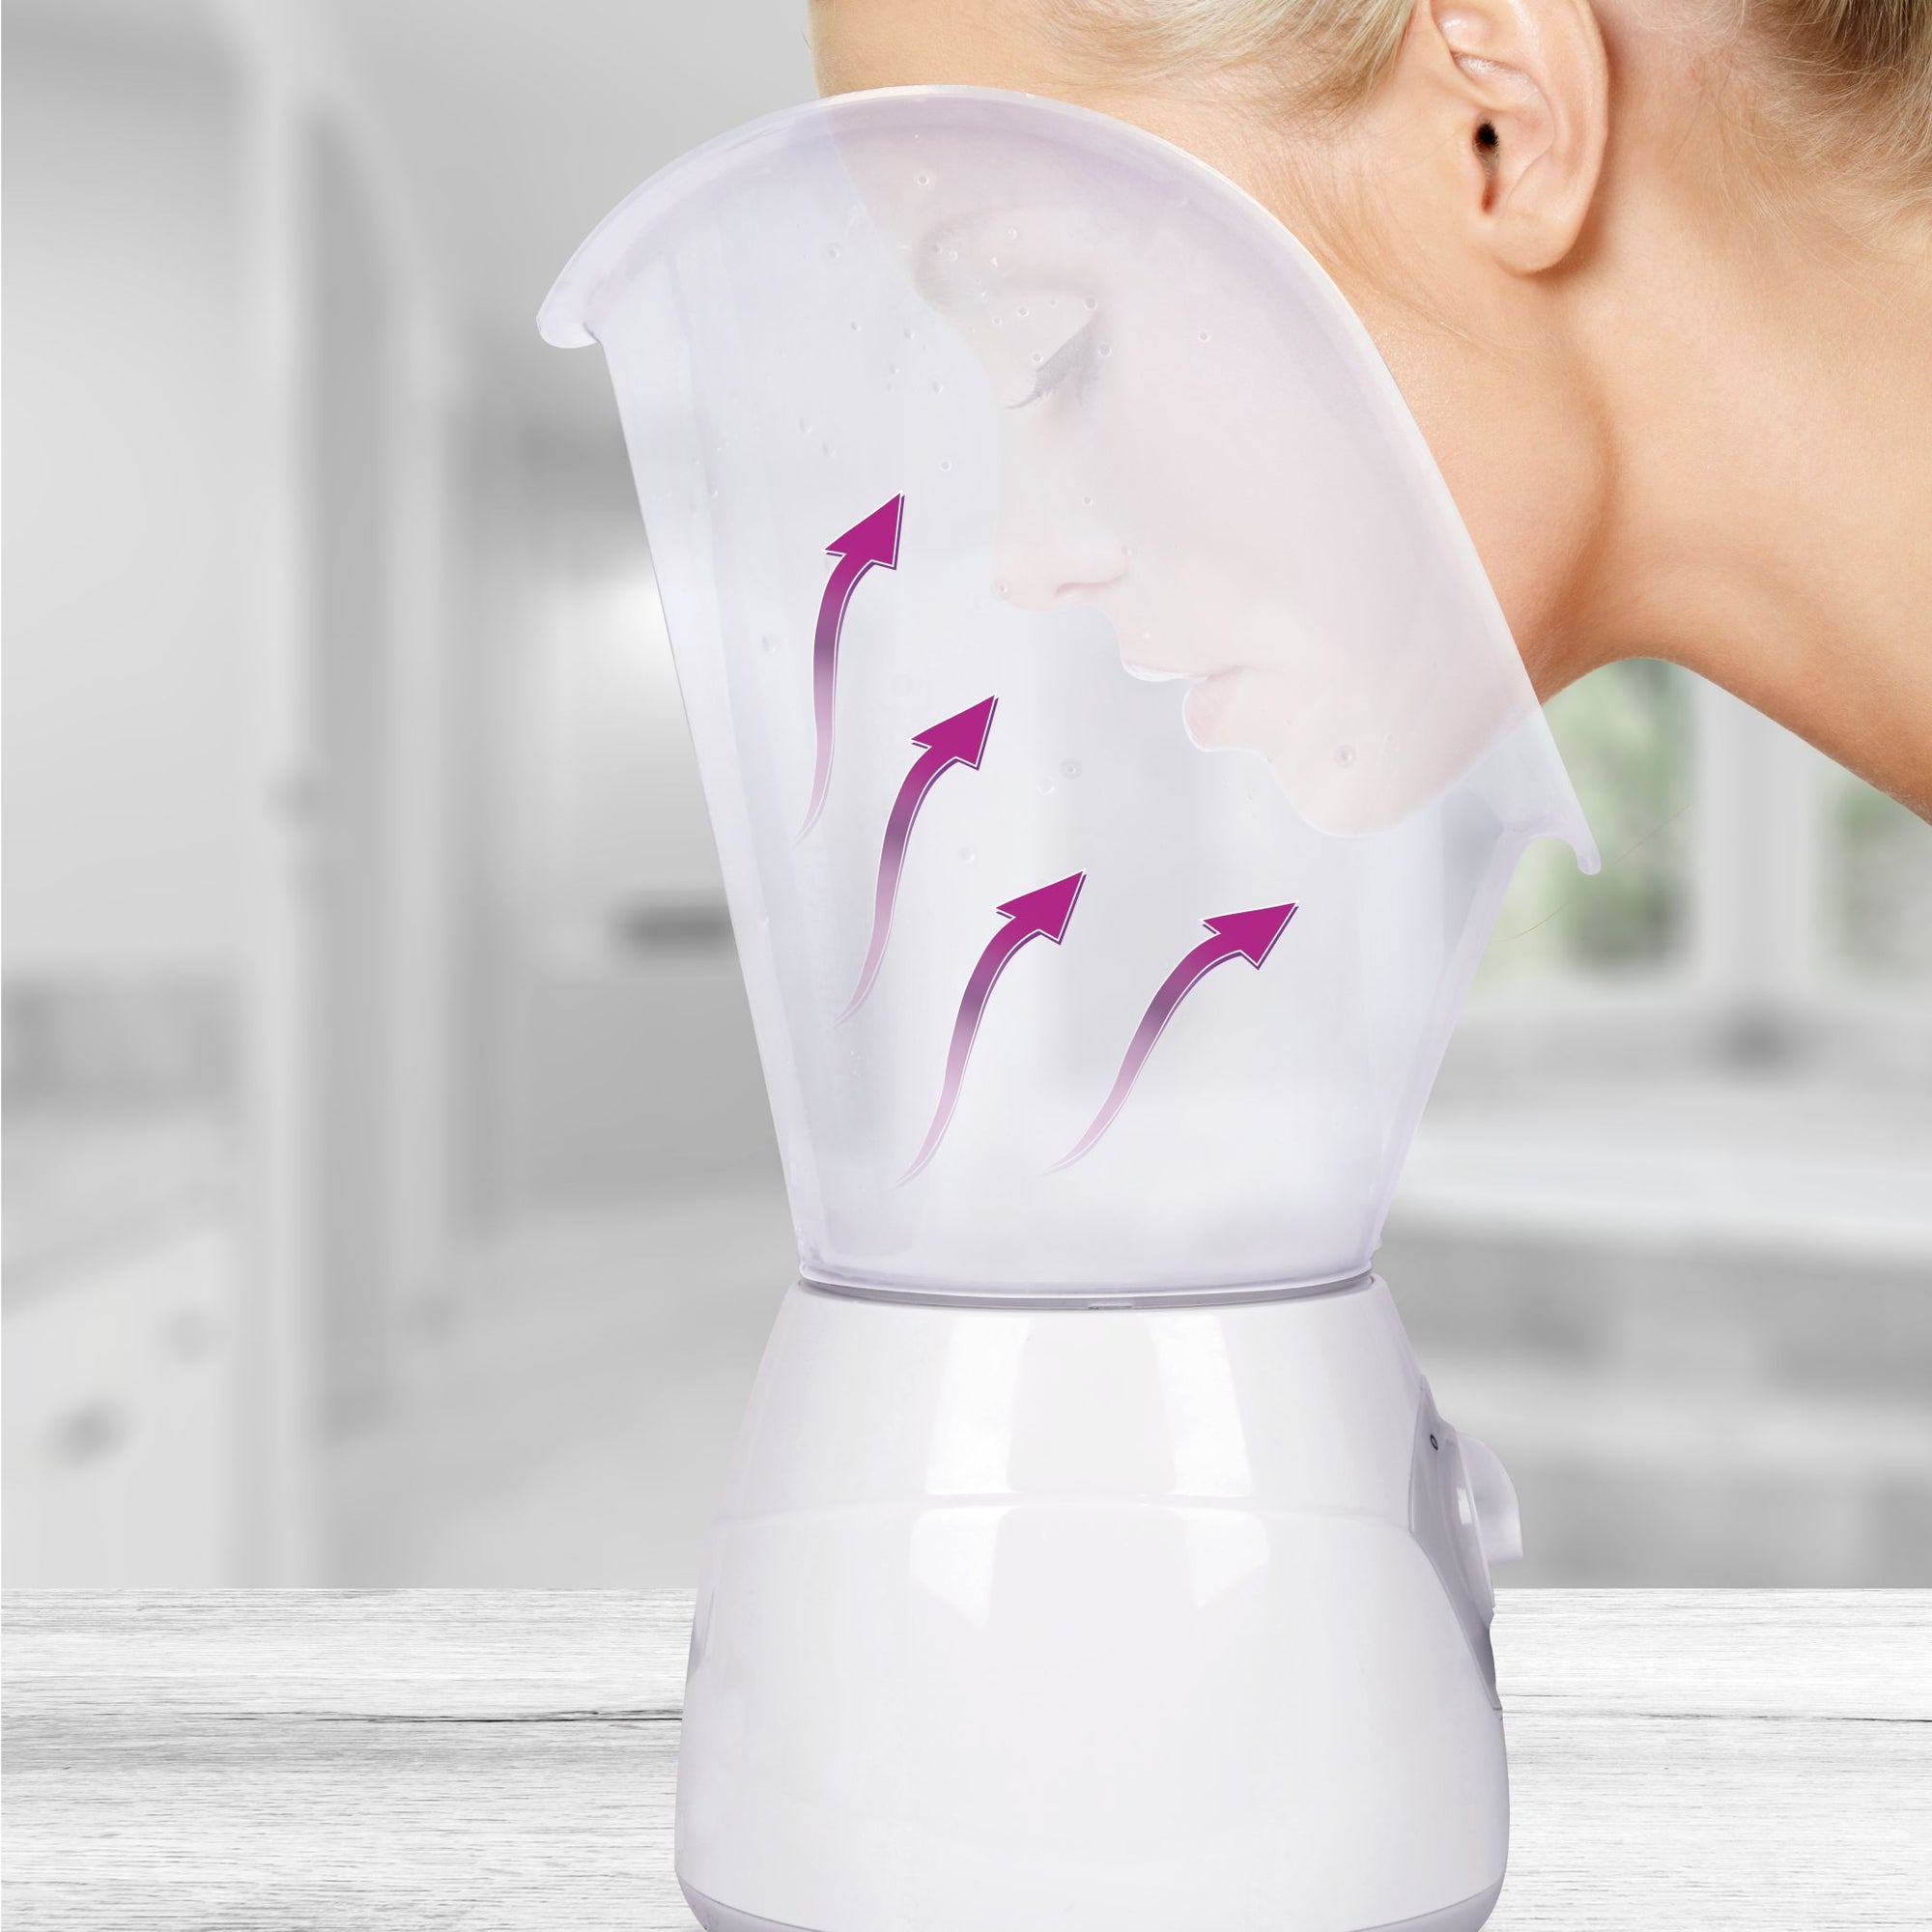 Women using Rio Face Sauna and Steamer at home